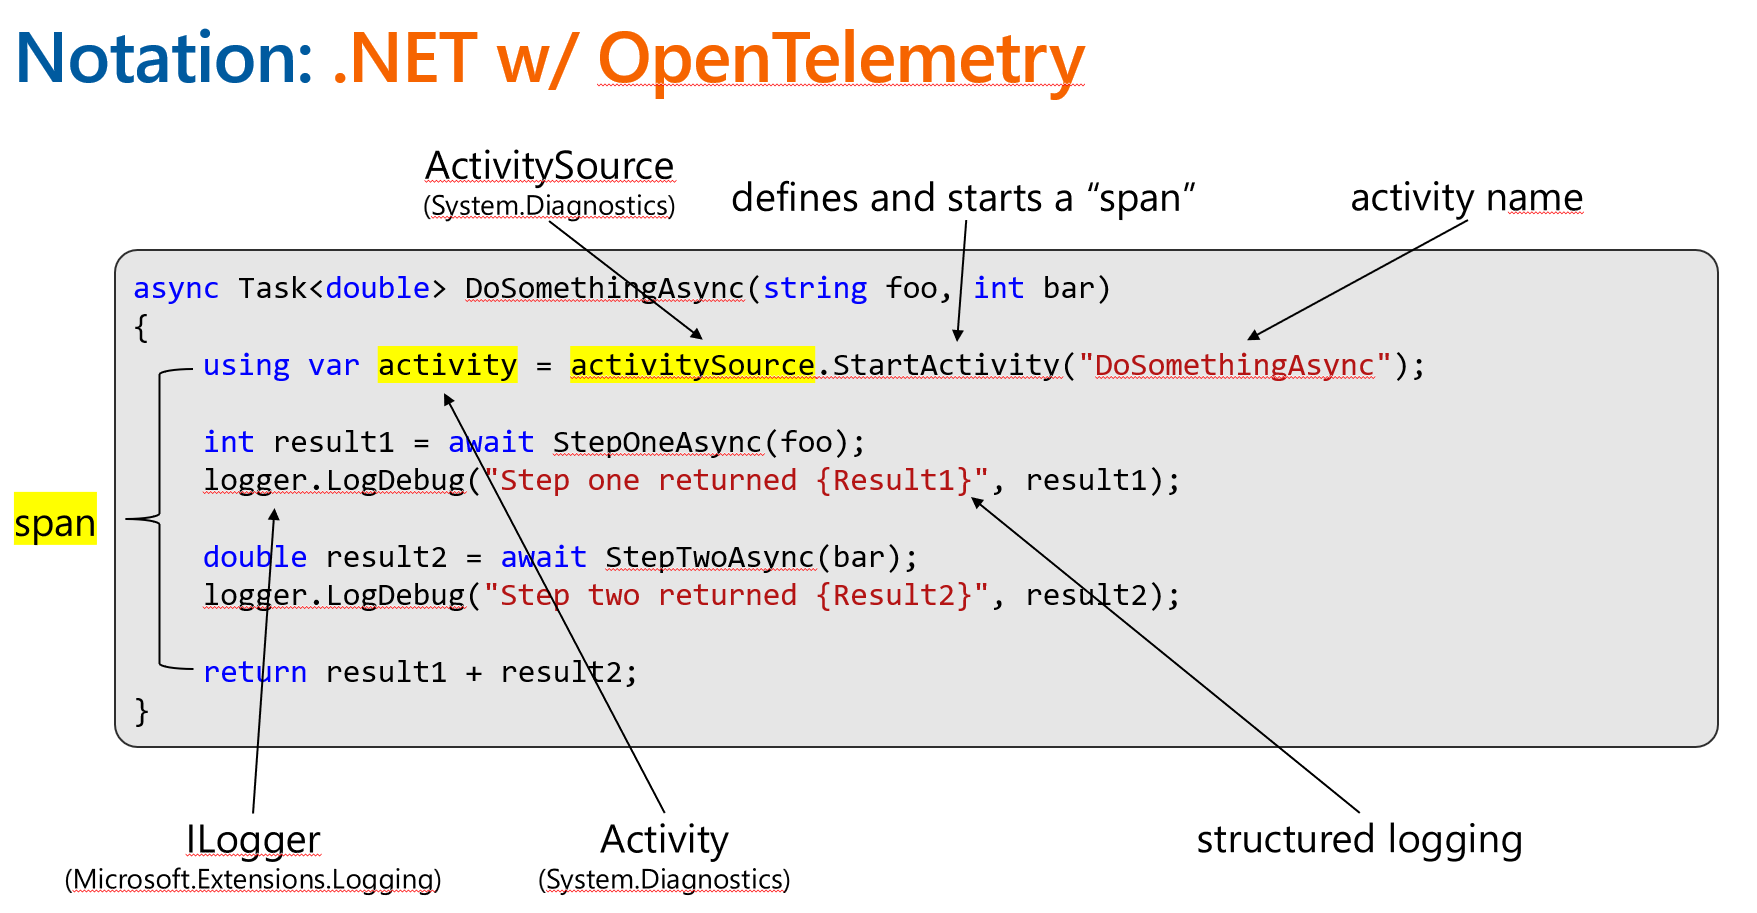 003.00 Code span with Opentelemetry.png